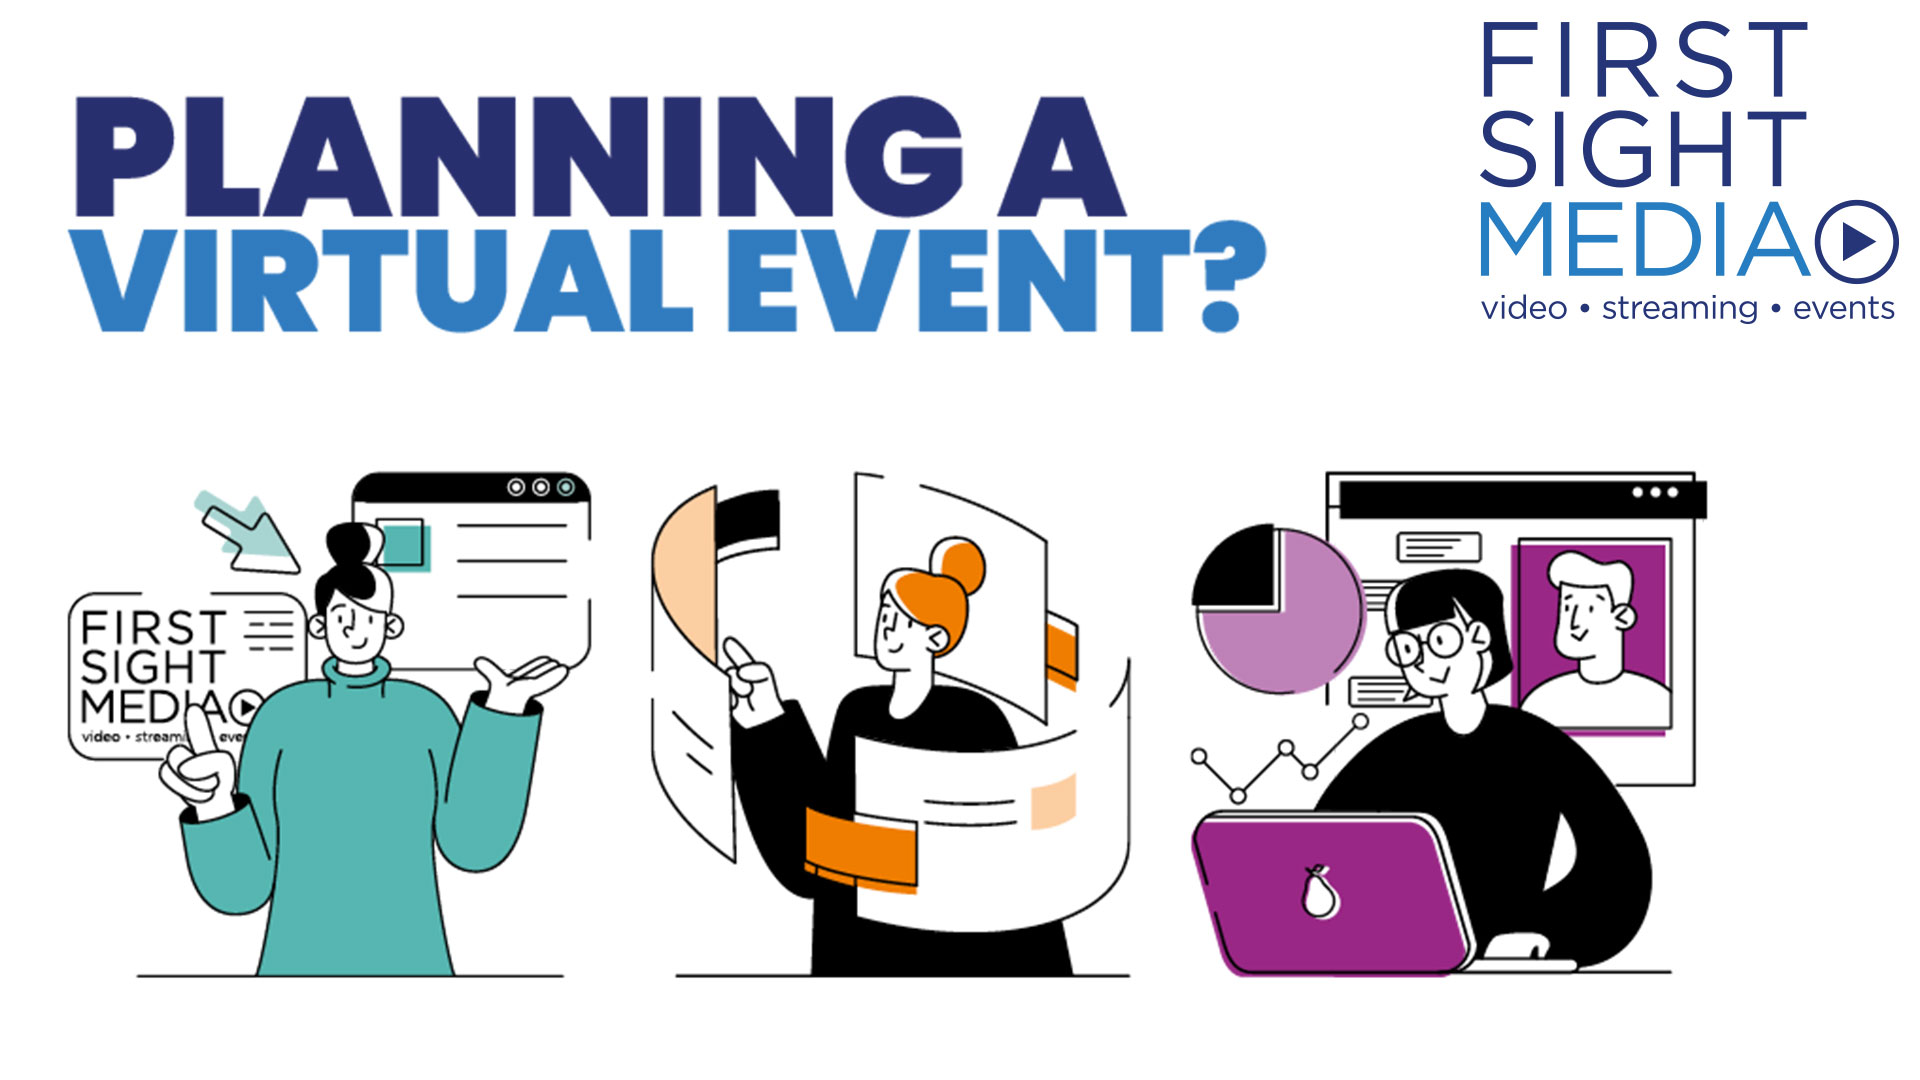 Planning a virtual event